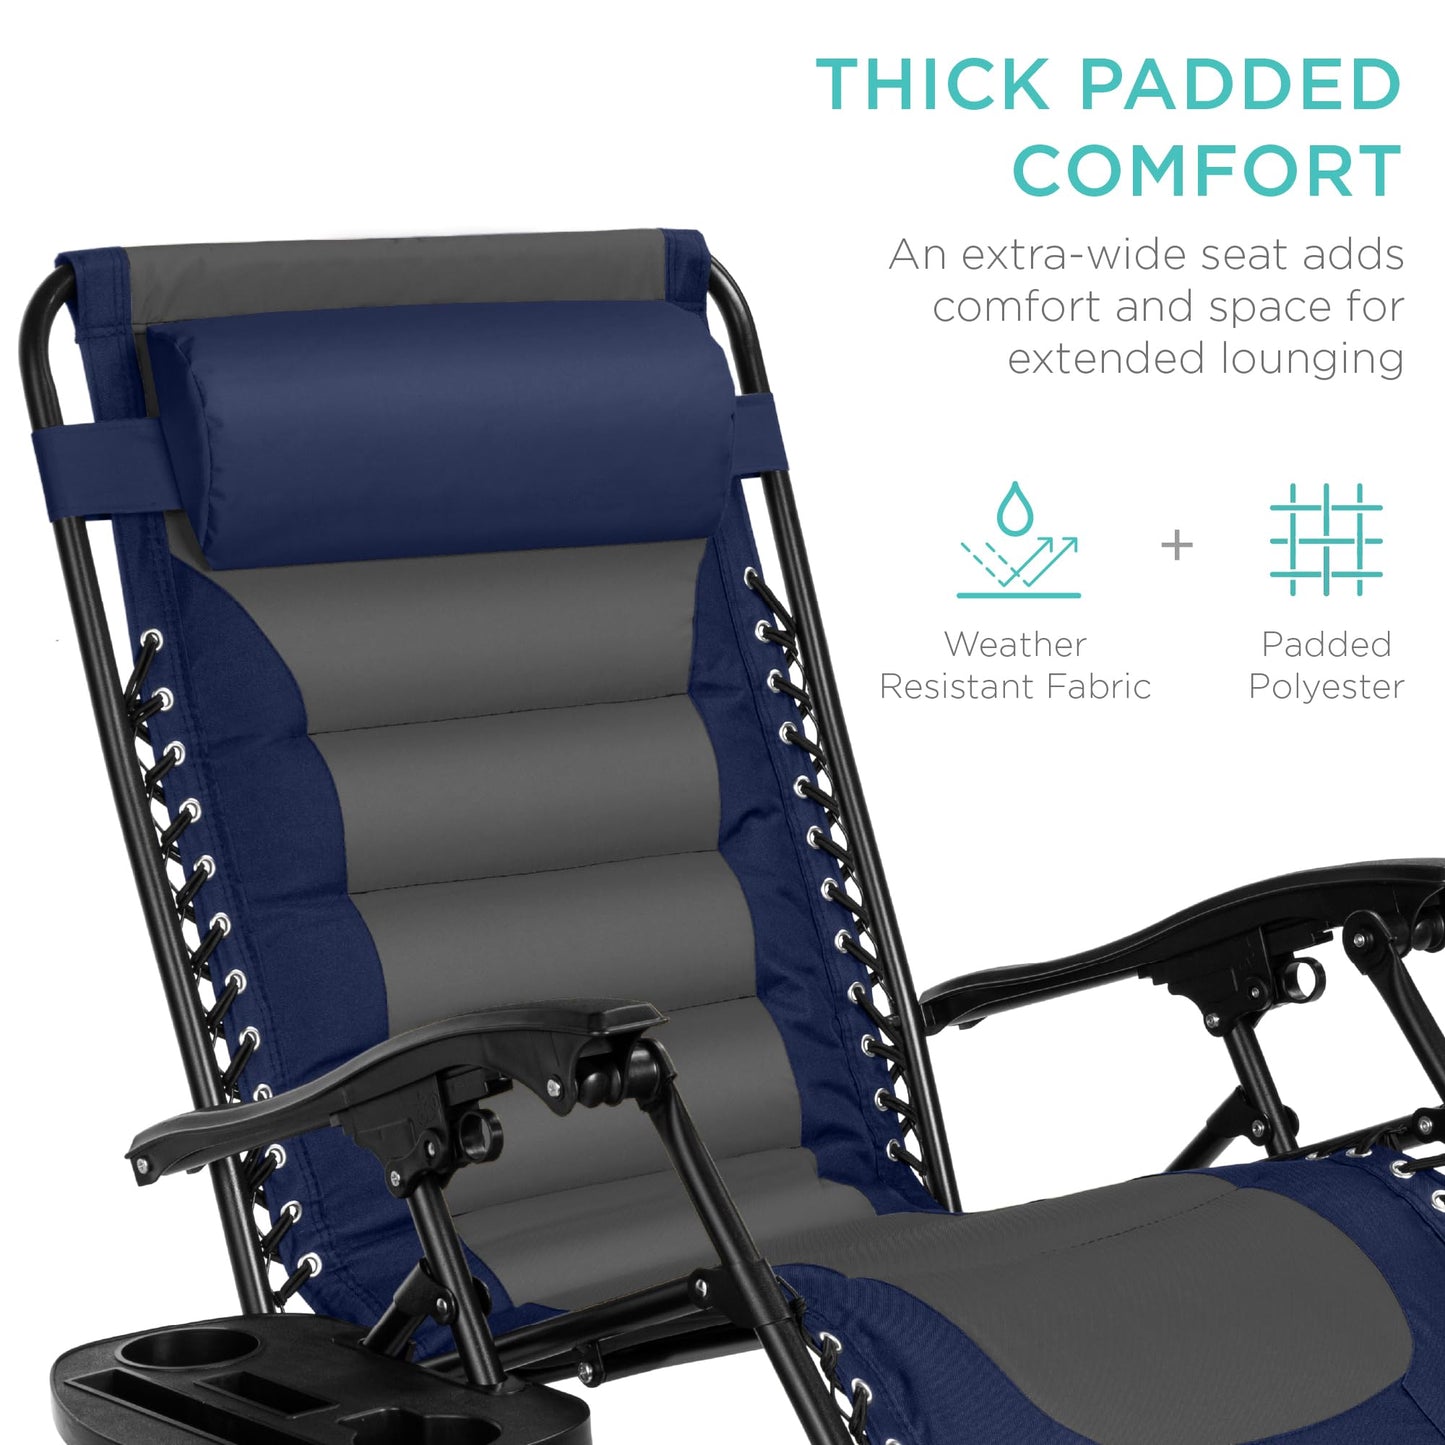 Best Choice Products Oversized Padded Zero Gravity Chair, Folding Outdoor Patio Recliner, XL Anti Gravity Lounger for Backyard w/Headrest, Cup Holder, Side Tray, Polyester Mesh - Navy/Gray